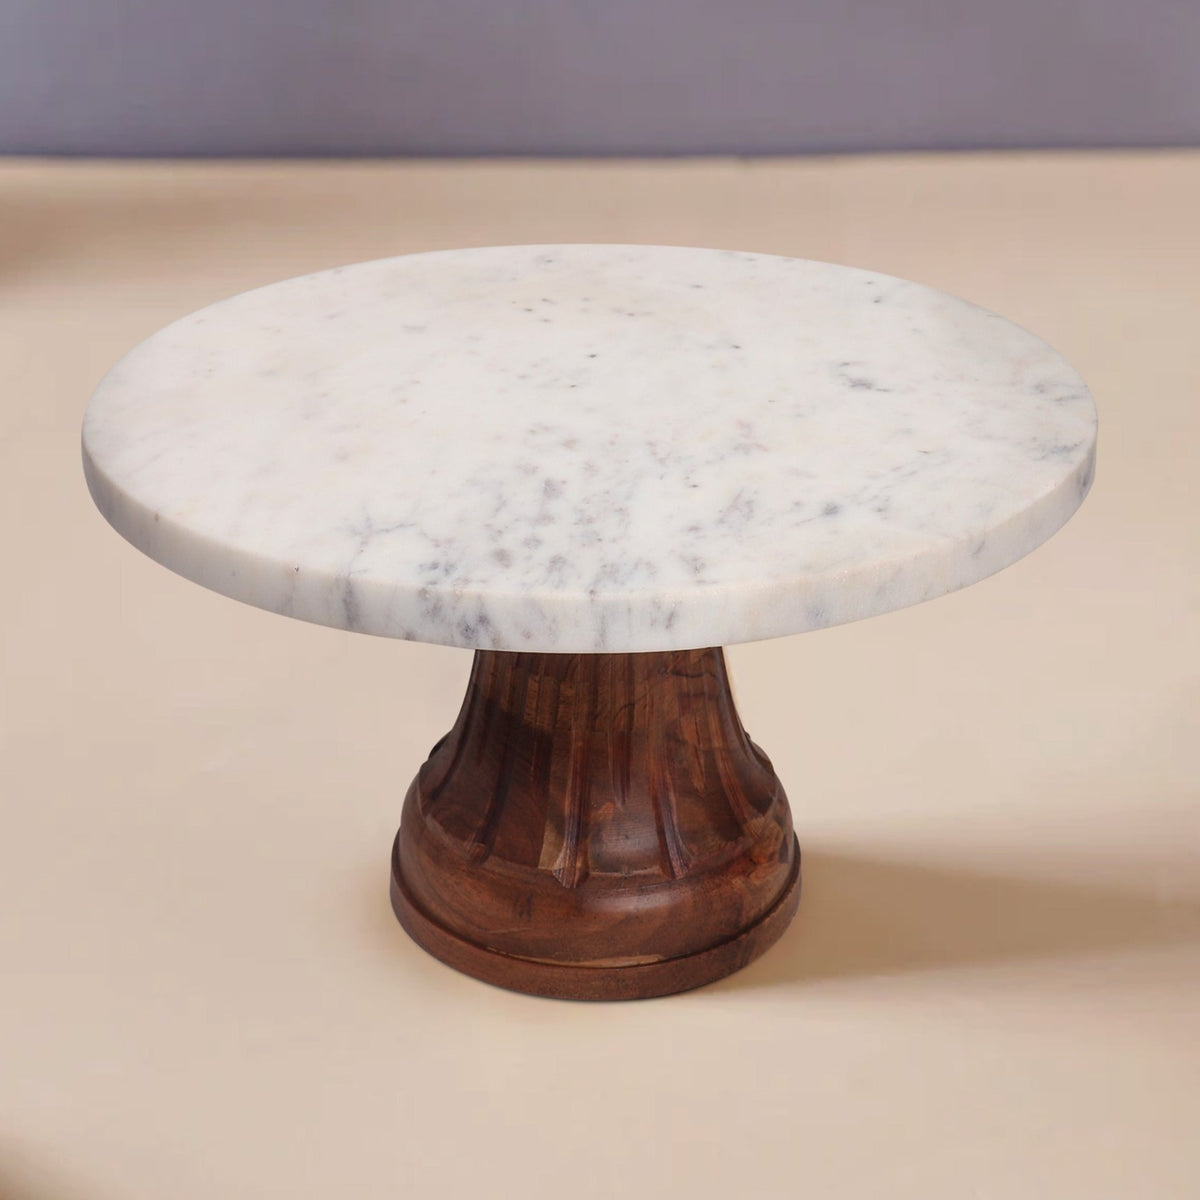 Marble and Wood Cake Stand | Cake Platter (12-inch)